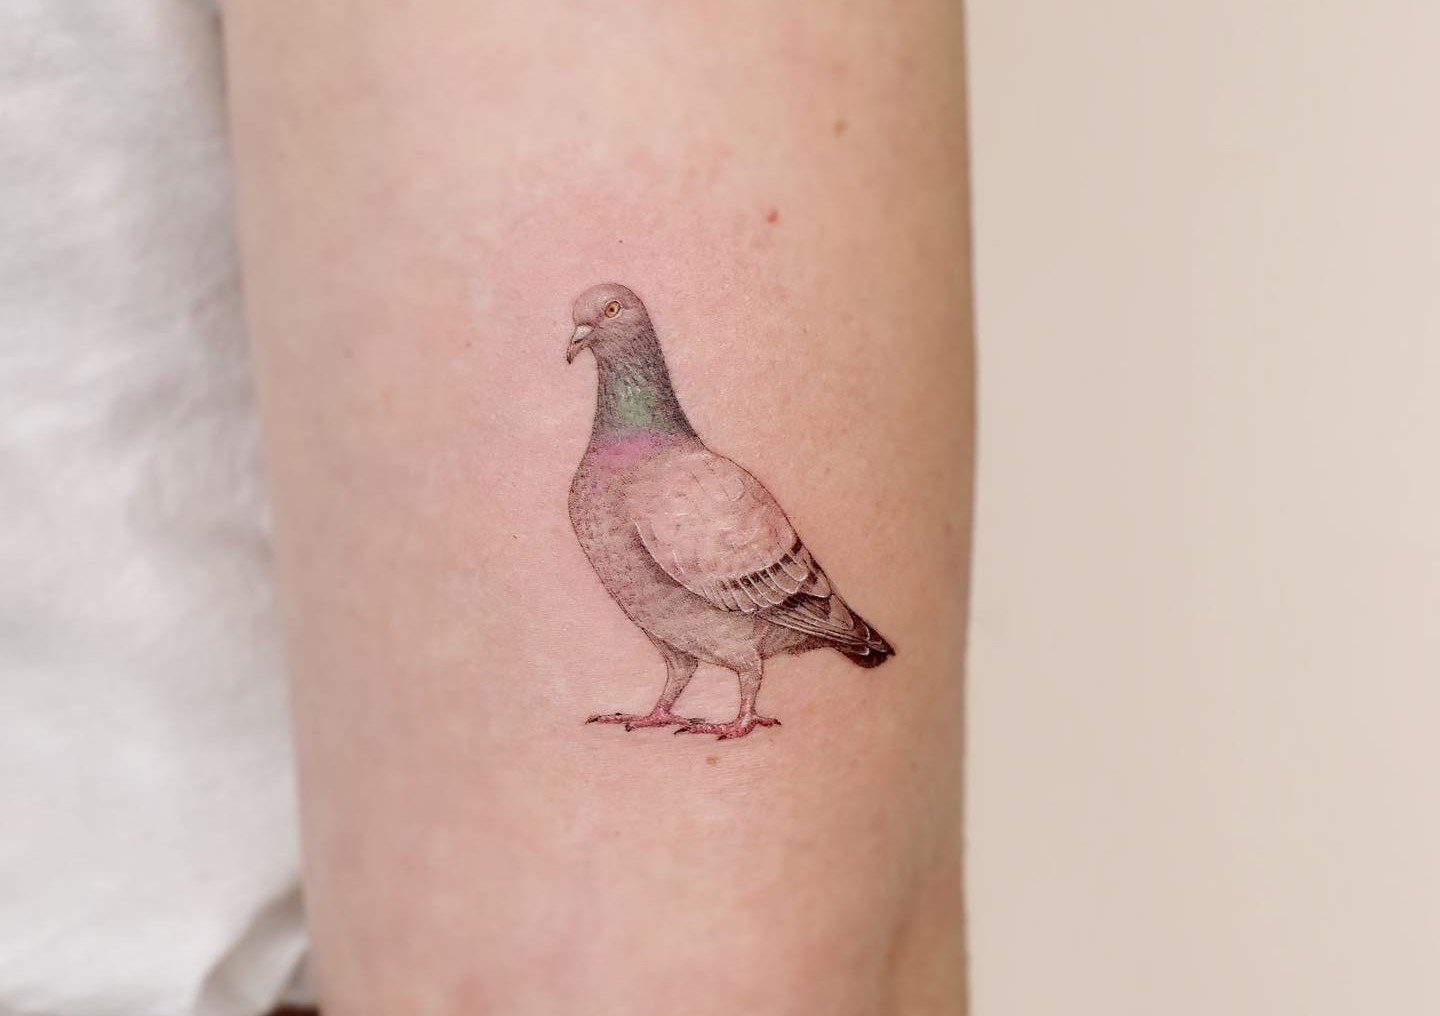 The Meaning of Birds in Tattoos: The Intricate Meanings Behind Popular Tattoo Styles and Symbols